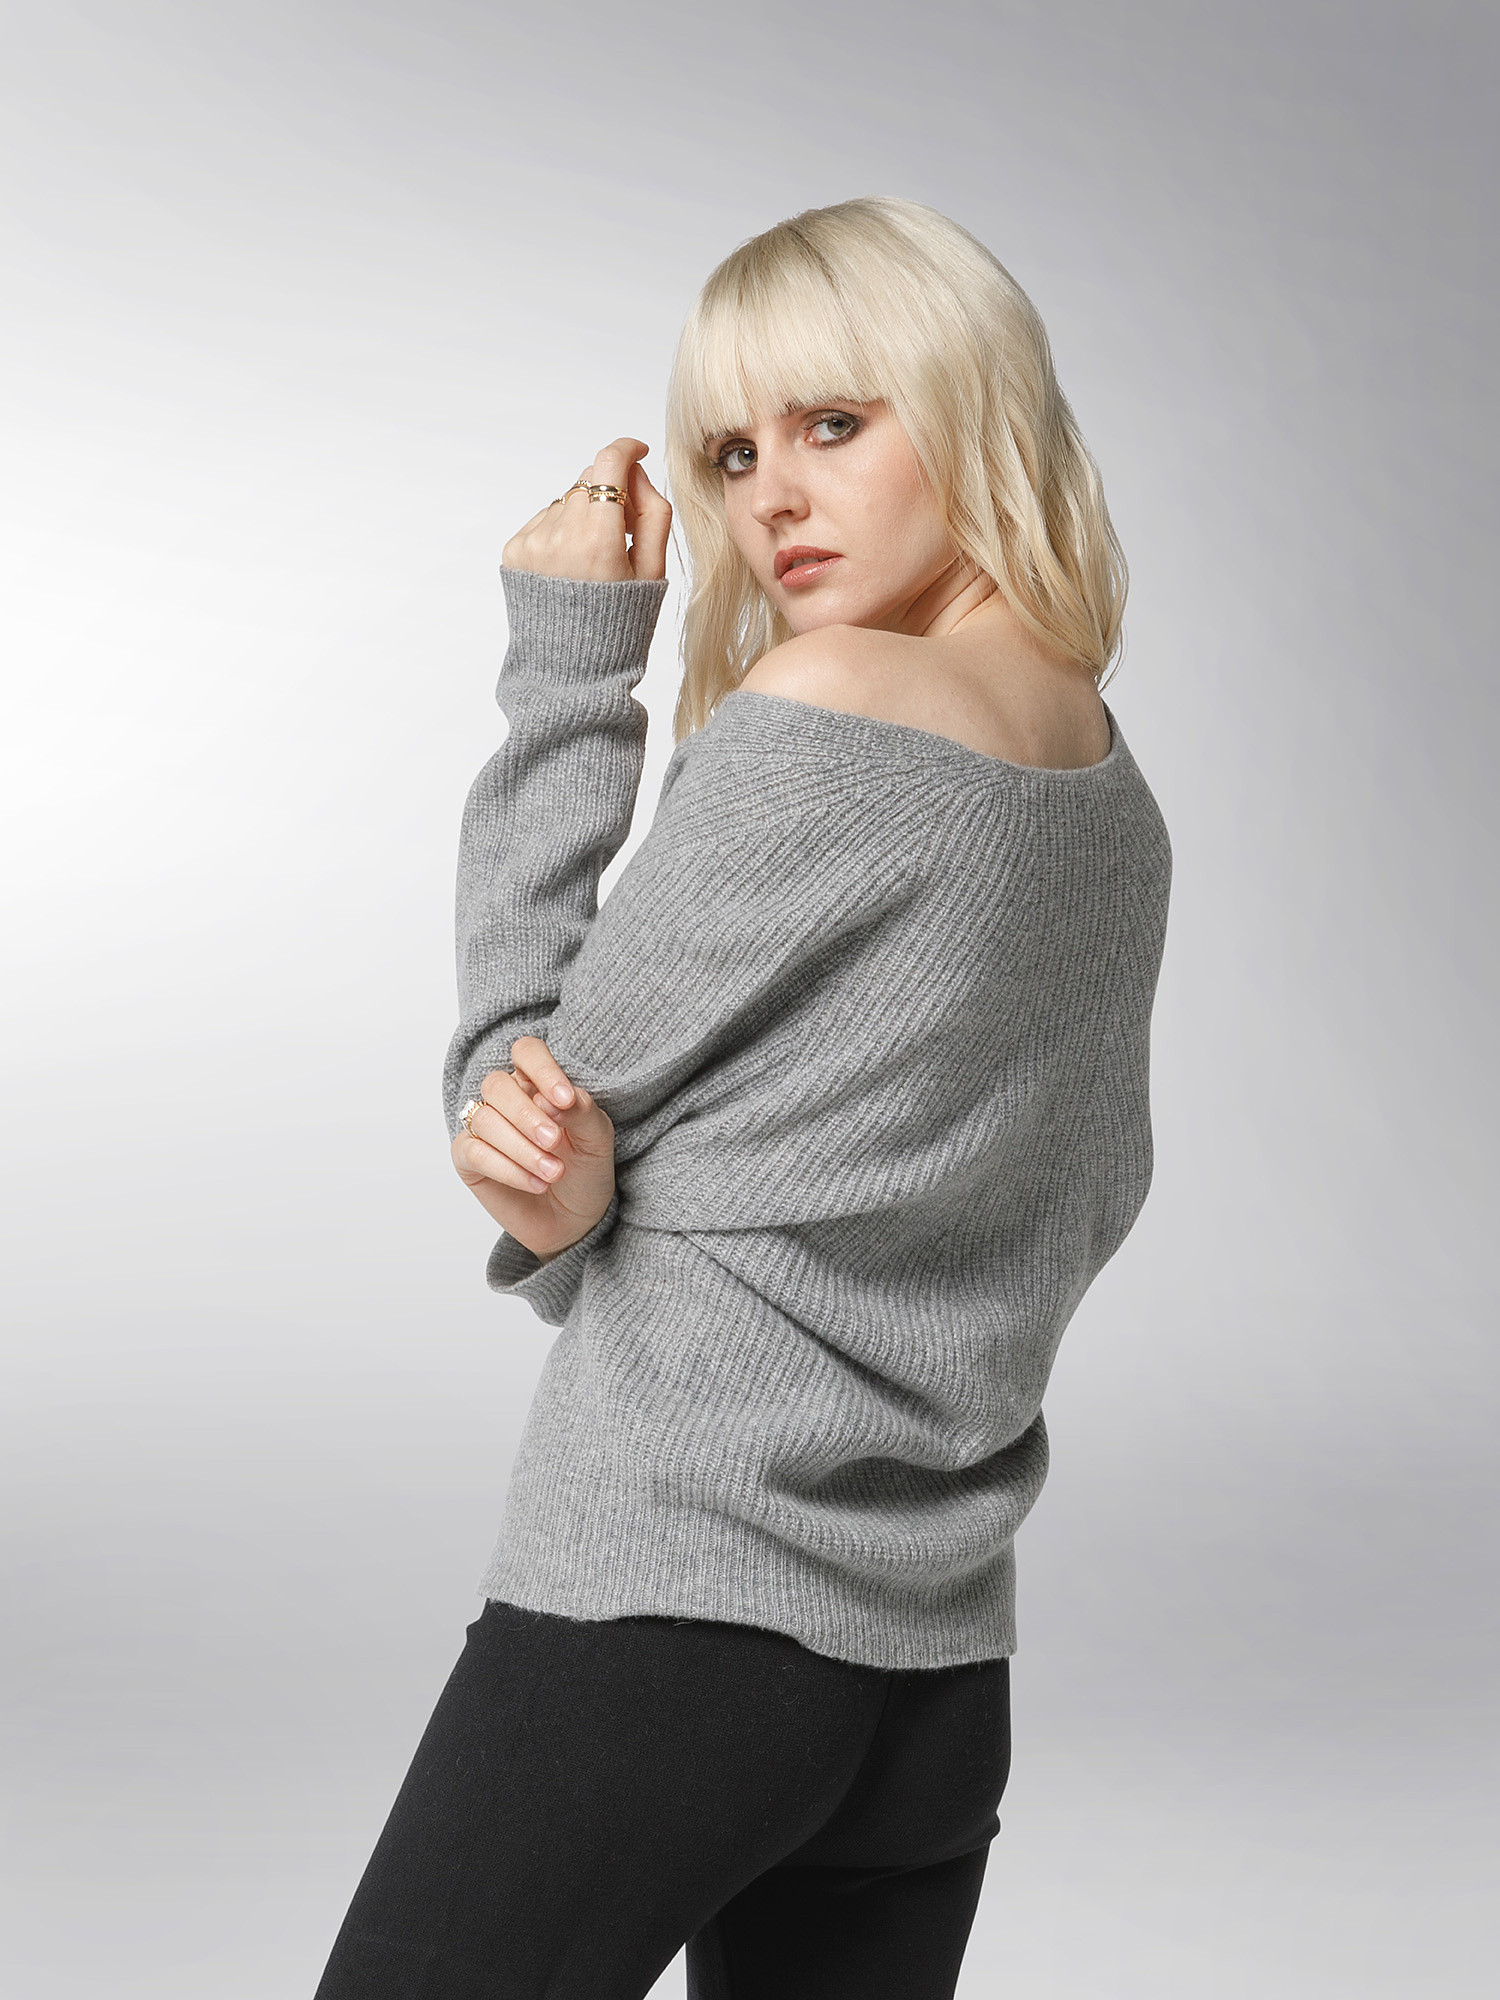 K Collection - Cardigan, Grigio, large image number 3